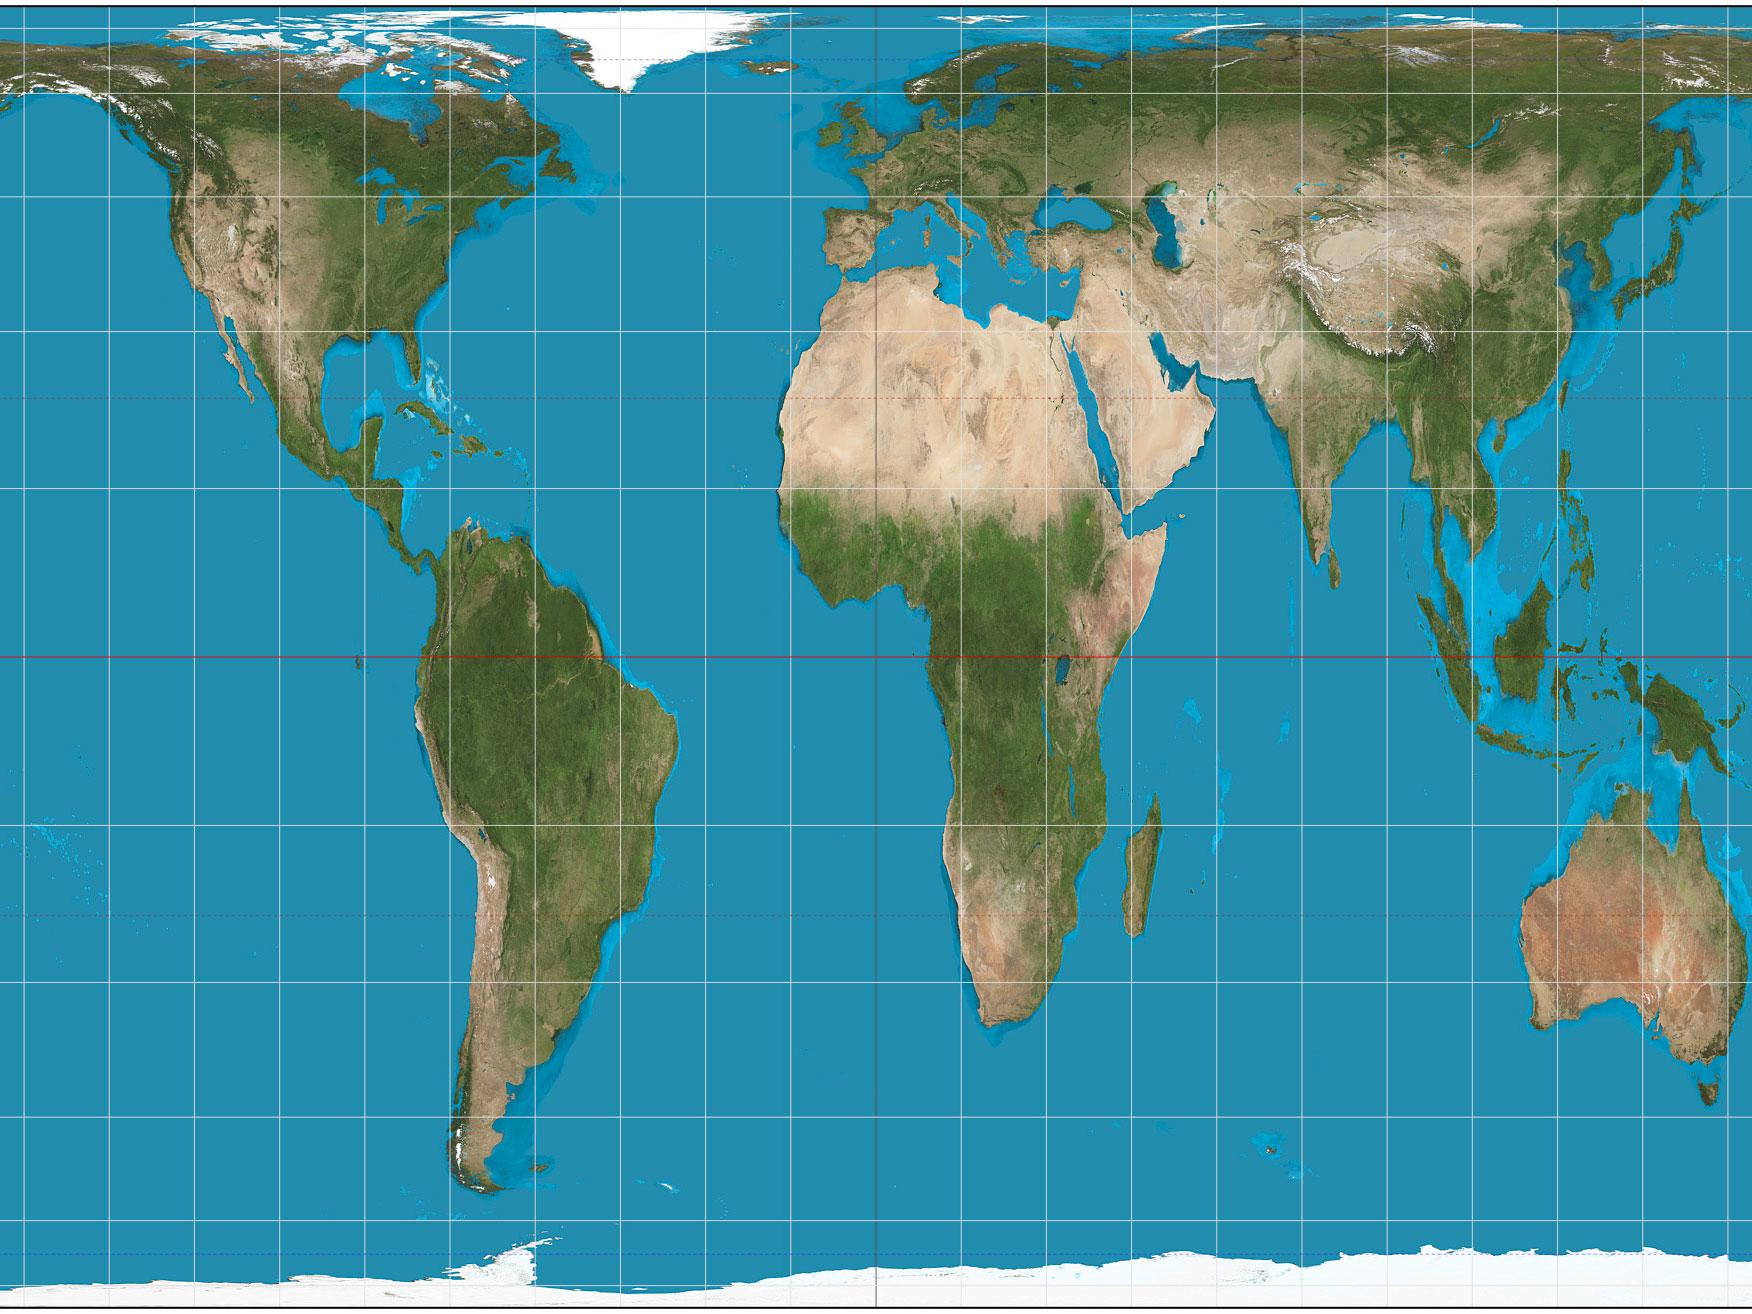 A Gall-Peters projection map of the world, which gives a much better picture of what the world as a whole actually looks like